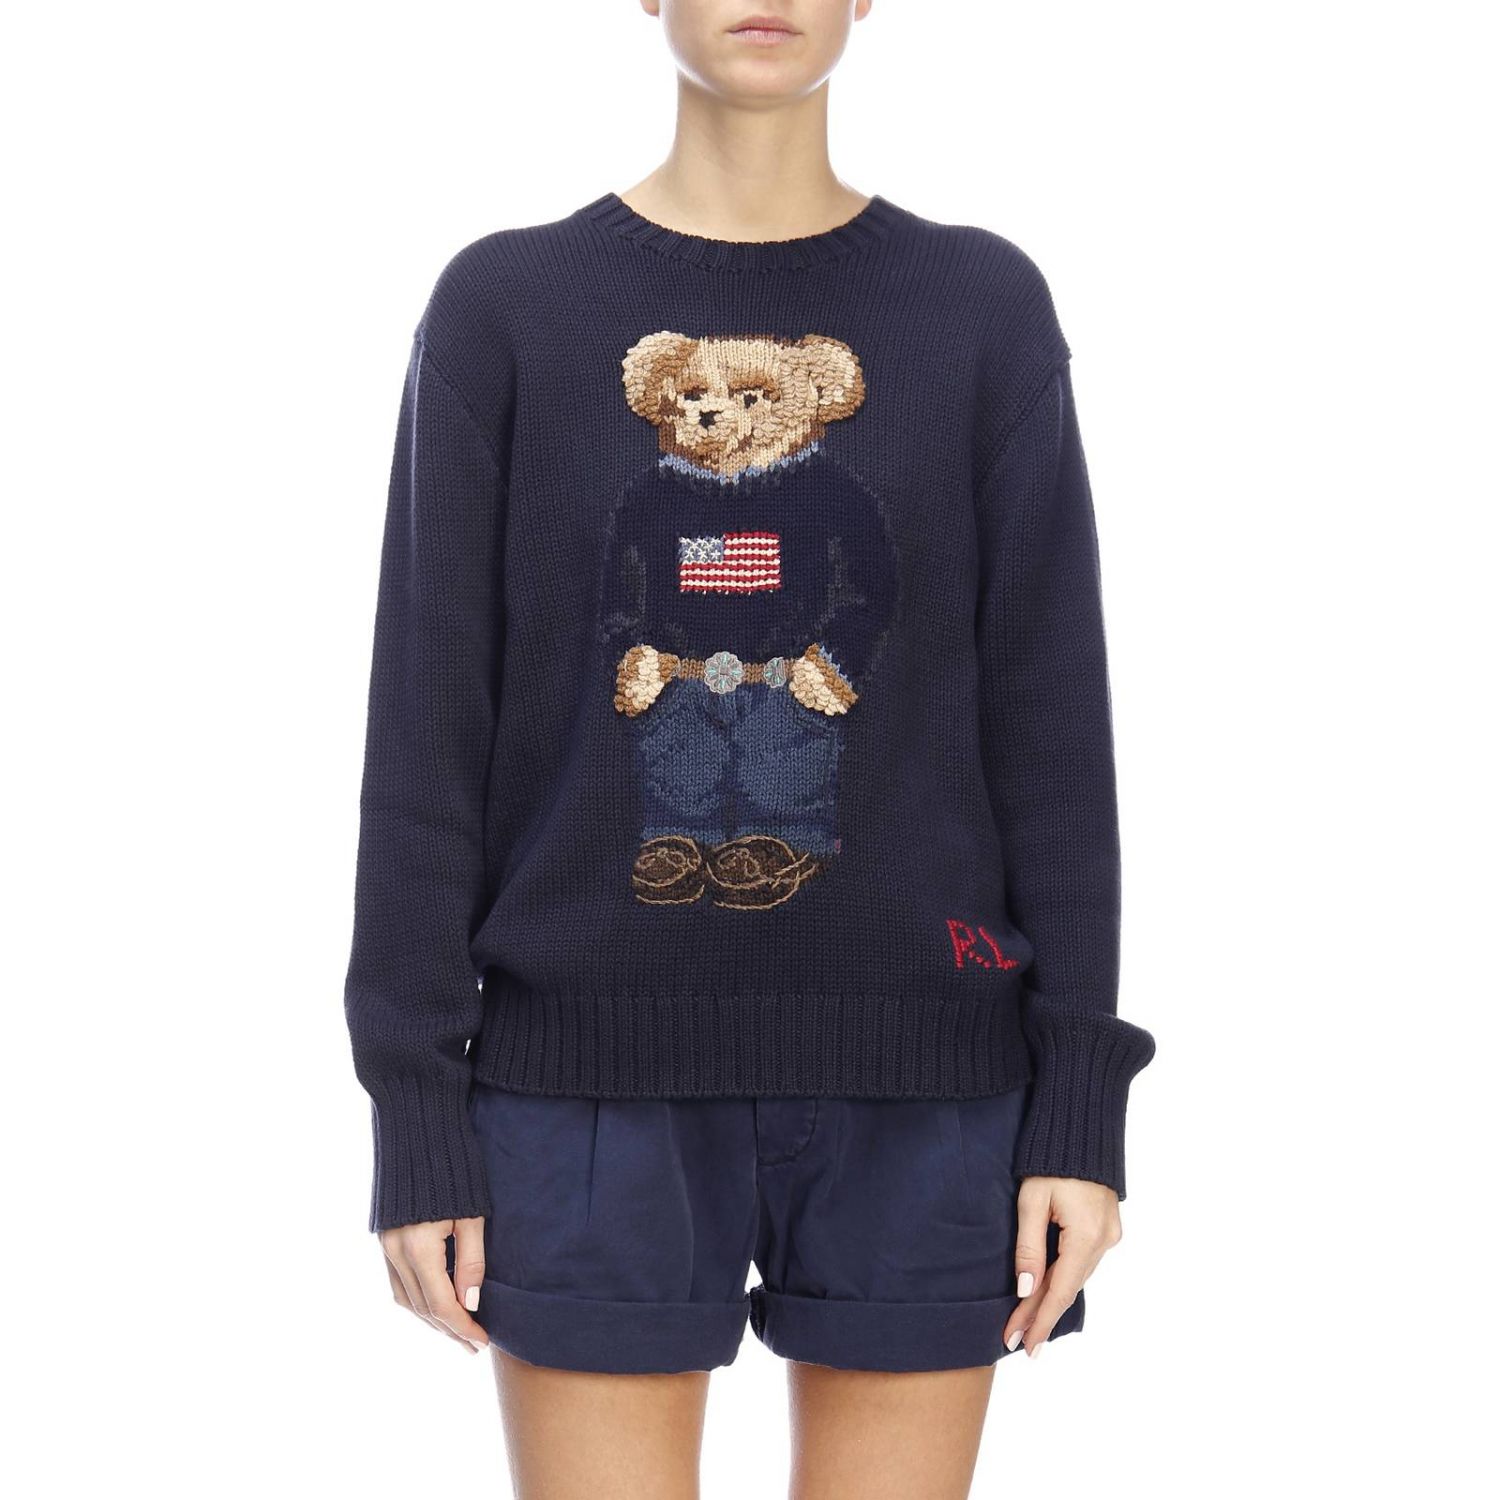 jersey oso polo ralph lauren mujer